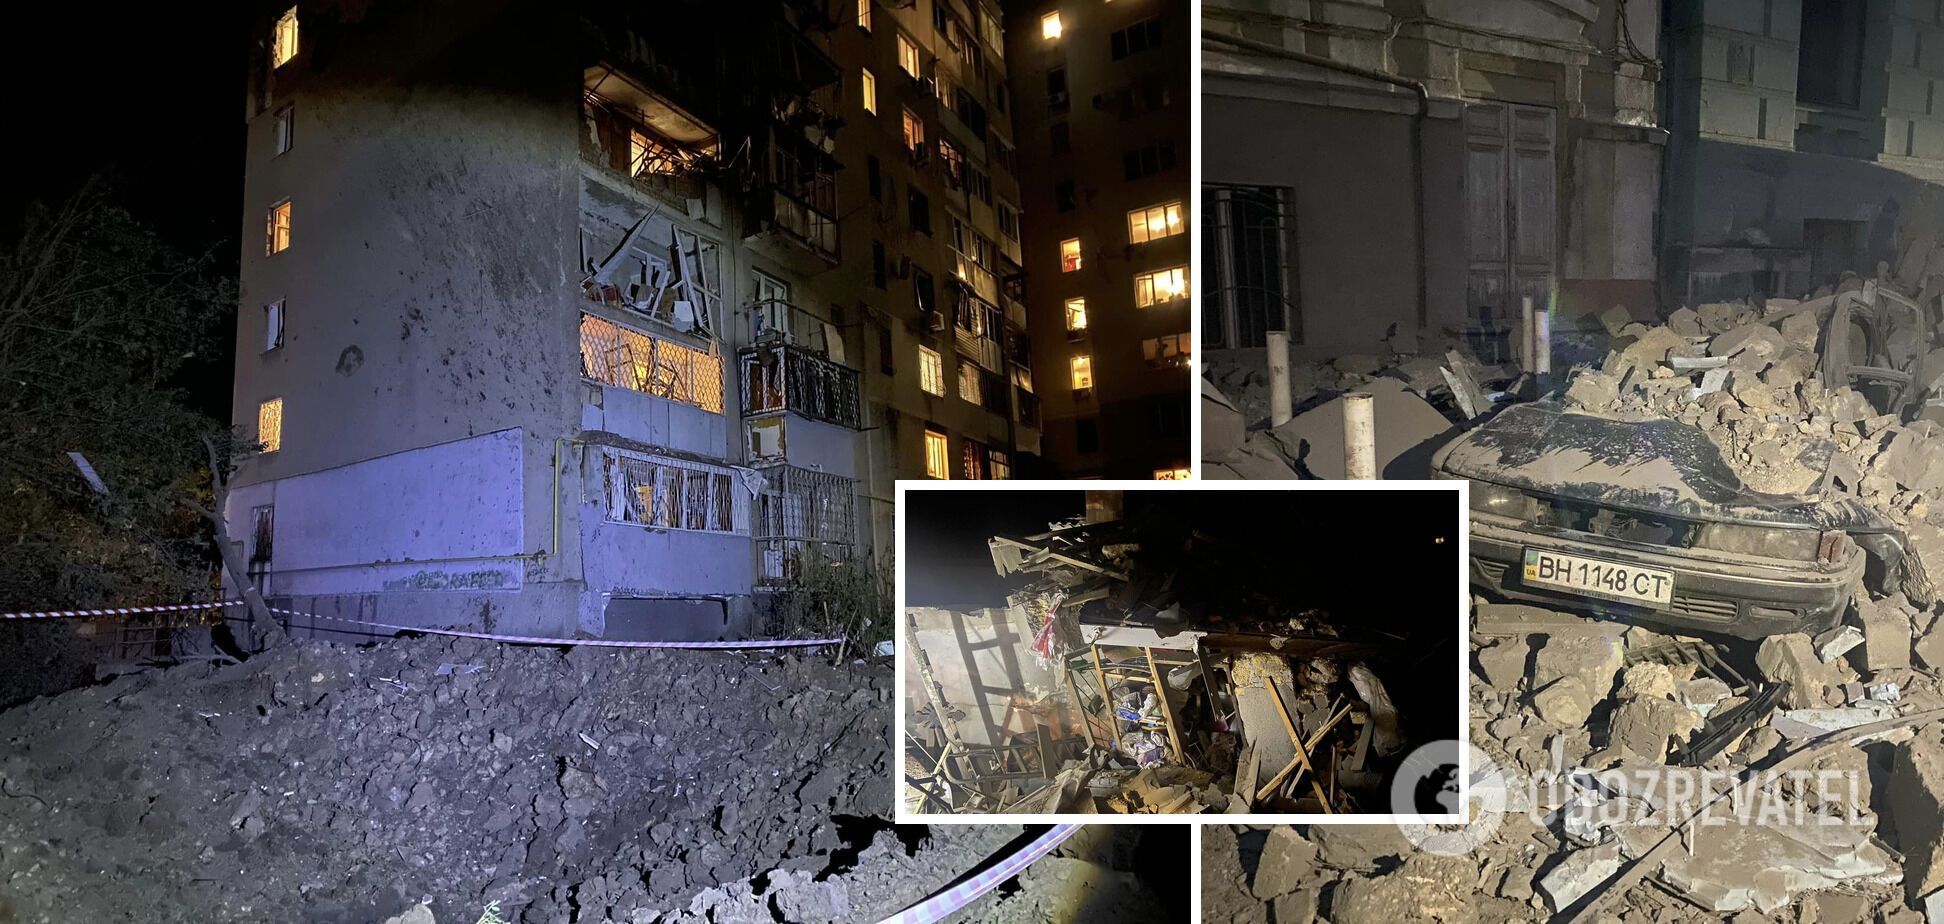 New photos and details of the night attack of the Russian Federation on Odesa have appeared: destruction in the city, UOC-MP cathedral damaged